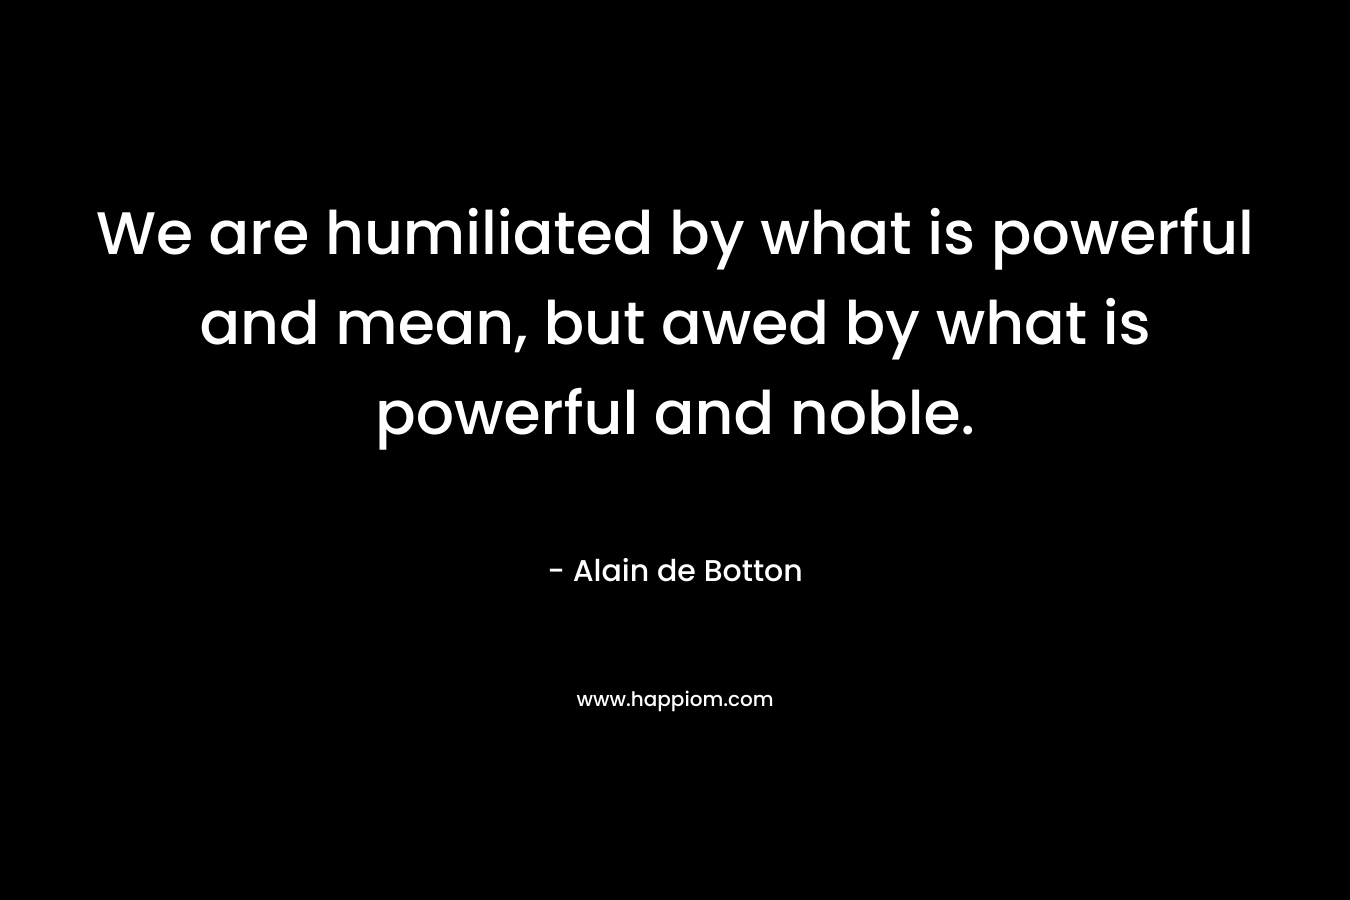 We are humiliated by what is powerful and mean, but awed by what is powerful and noble.